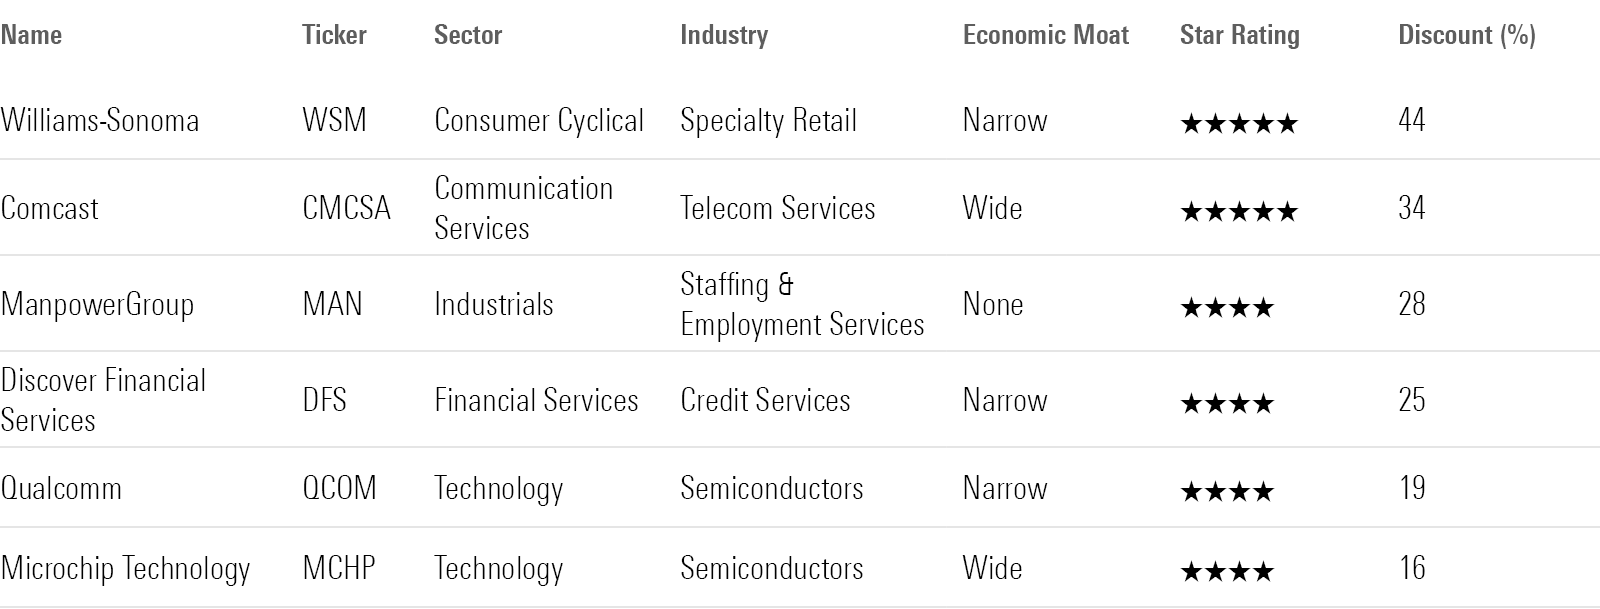 A table showing Morningstar ratings for Williams-Sonoma, Comcast, ManpowerGroup, Discover Financial Services, Qualcomm, and Microchip Technology stocks.